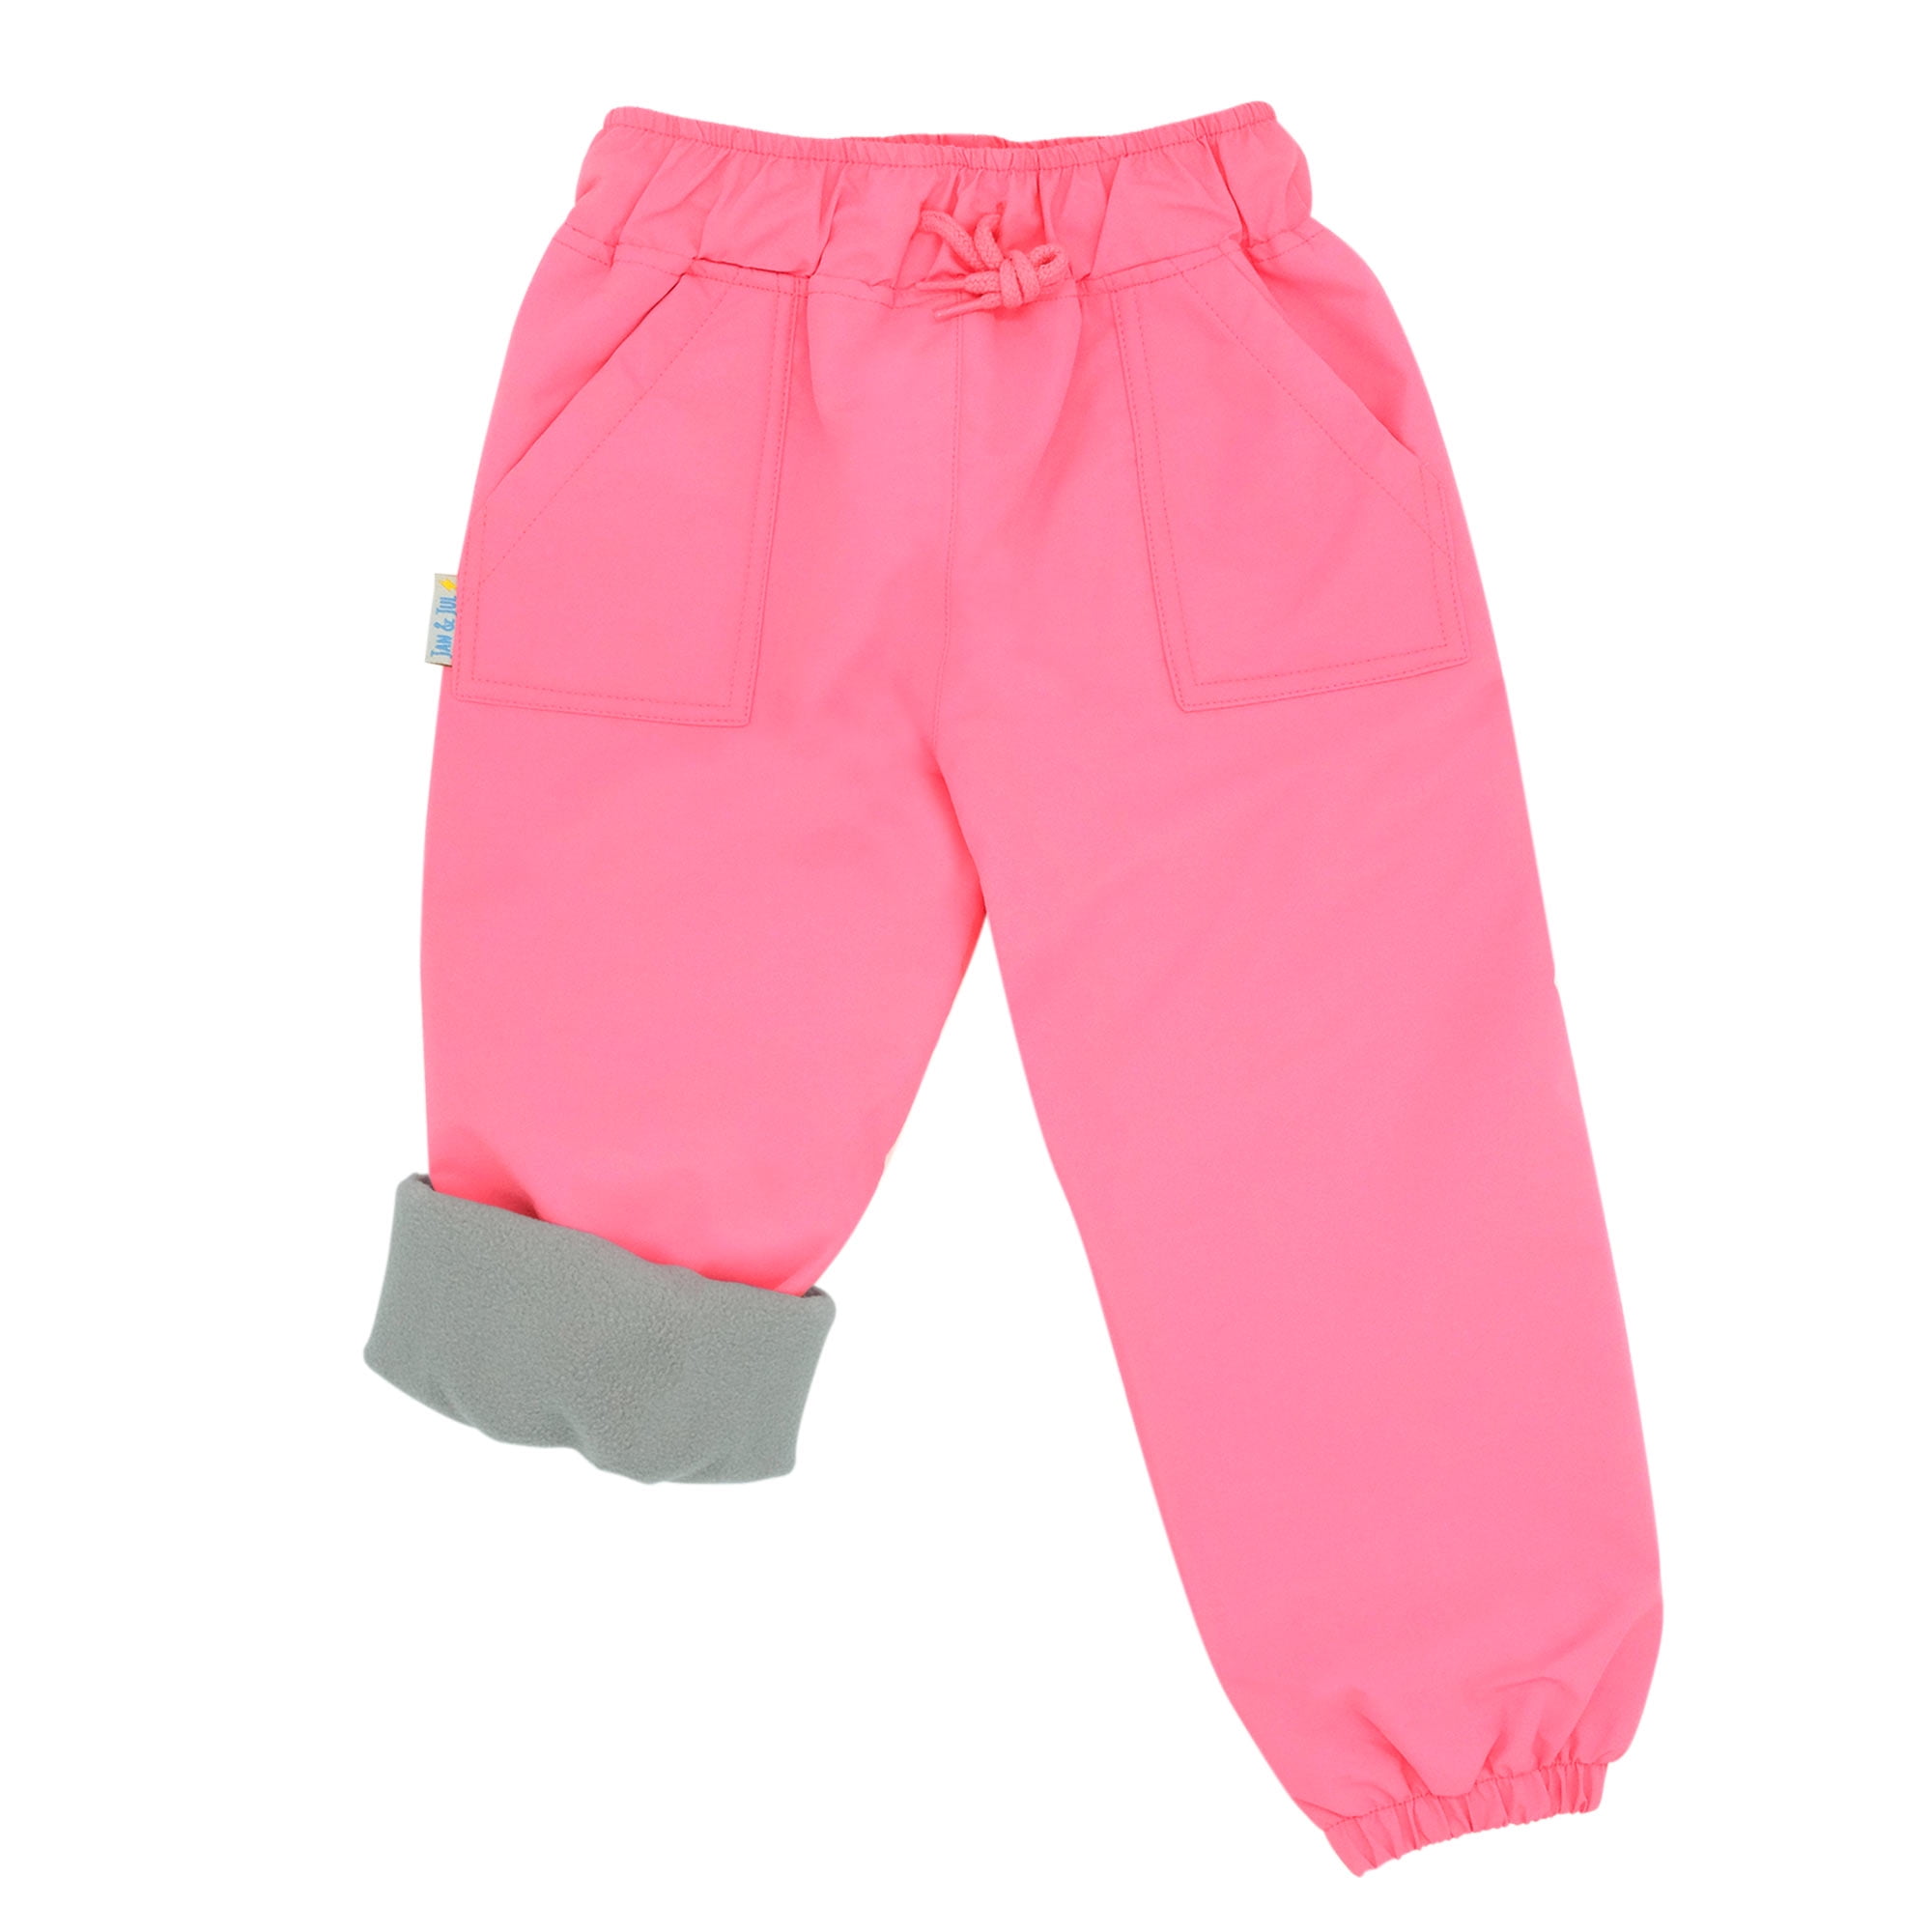 Stay cosy with toasty pants perfect for your trip and rainy season🌧️❄️  Shop our new line of Warm Lined Pants available for Kids